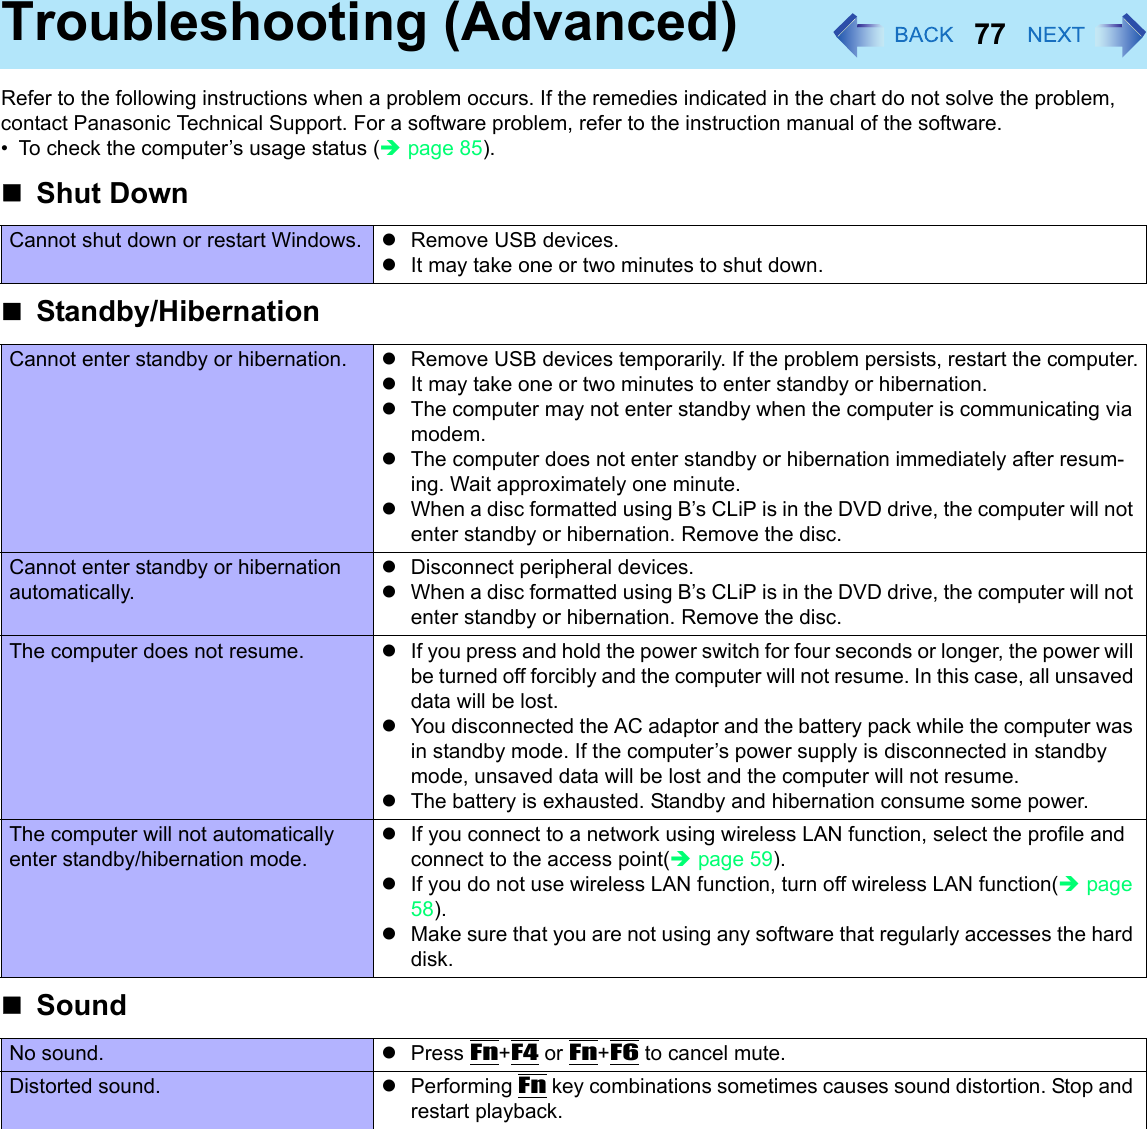 77Troubleshooting (Advanced)Refer to the following instructions when a problem occurs. If the remedies indicated in the chart do not solve the problem, contact Panasonic Technical Support. For a software problem, refer to the instruction manual of the software.• To check the computer’s usage status (Îpage 85).Shut DownCannot shut down or restart Windows. zRemove USB devices.zIt may take one or two minutes to shut down. Standby/HibernationCannot enter standby or hibernation. zRemove USB devices temporarily. If the problem persists, restart the computer.zIt may take one or two minutes to enter standby or hibernation. zThe computer may not enter standby when the computer is communicating via modem. zThe computer does not enter standby or hibernation immediately after resum-ing. Wait approximately one minute.zWhen a disc formatted using B’s CLiP is in the DVD drive, the computer will not enter standby or hibernation. Remove the disc.Cannot enter standby or hibernation automatically.zDisconnect peripheral devices.zWhen a disc formatted using B’s CLiP is in the DVD drive, the computer will not enter standby or hibernation. Remove the disc.The computer does not resume. zIf you press and hold the power switch for four seconds or longer, the power will be turned off forcibly and the computer will not resume. In this case, all unsaved data will be lost.zYou disconnected the AC adaptor and the battery pack while the computer was in standby mode. If the computer’s power supply is disconnected in standby mode, unsaved data will be lost and the computer will not resume.zThe battery is exhausted. Standby and hibernation consume some power.The computer will not automatically enter standby/hibernation mode.zIf you connect to a network using wireless LAN function, select the profile and connect to the access point(Îpage 59).zIf you do not use wireless LAN function, turn off wireless LAN function(Îpage 58).zMake sure that you are not using any software that regularly accesses the hard disk.SoundNo sound. zPress Fn+F4 or Fn+F6 to cancel mute.Distorted sound. zPerforming Fn key combinations sometimes causes sound distortion. Stop and restart playback.